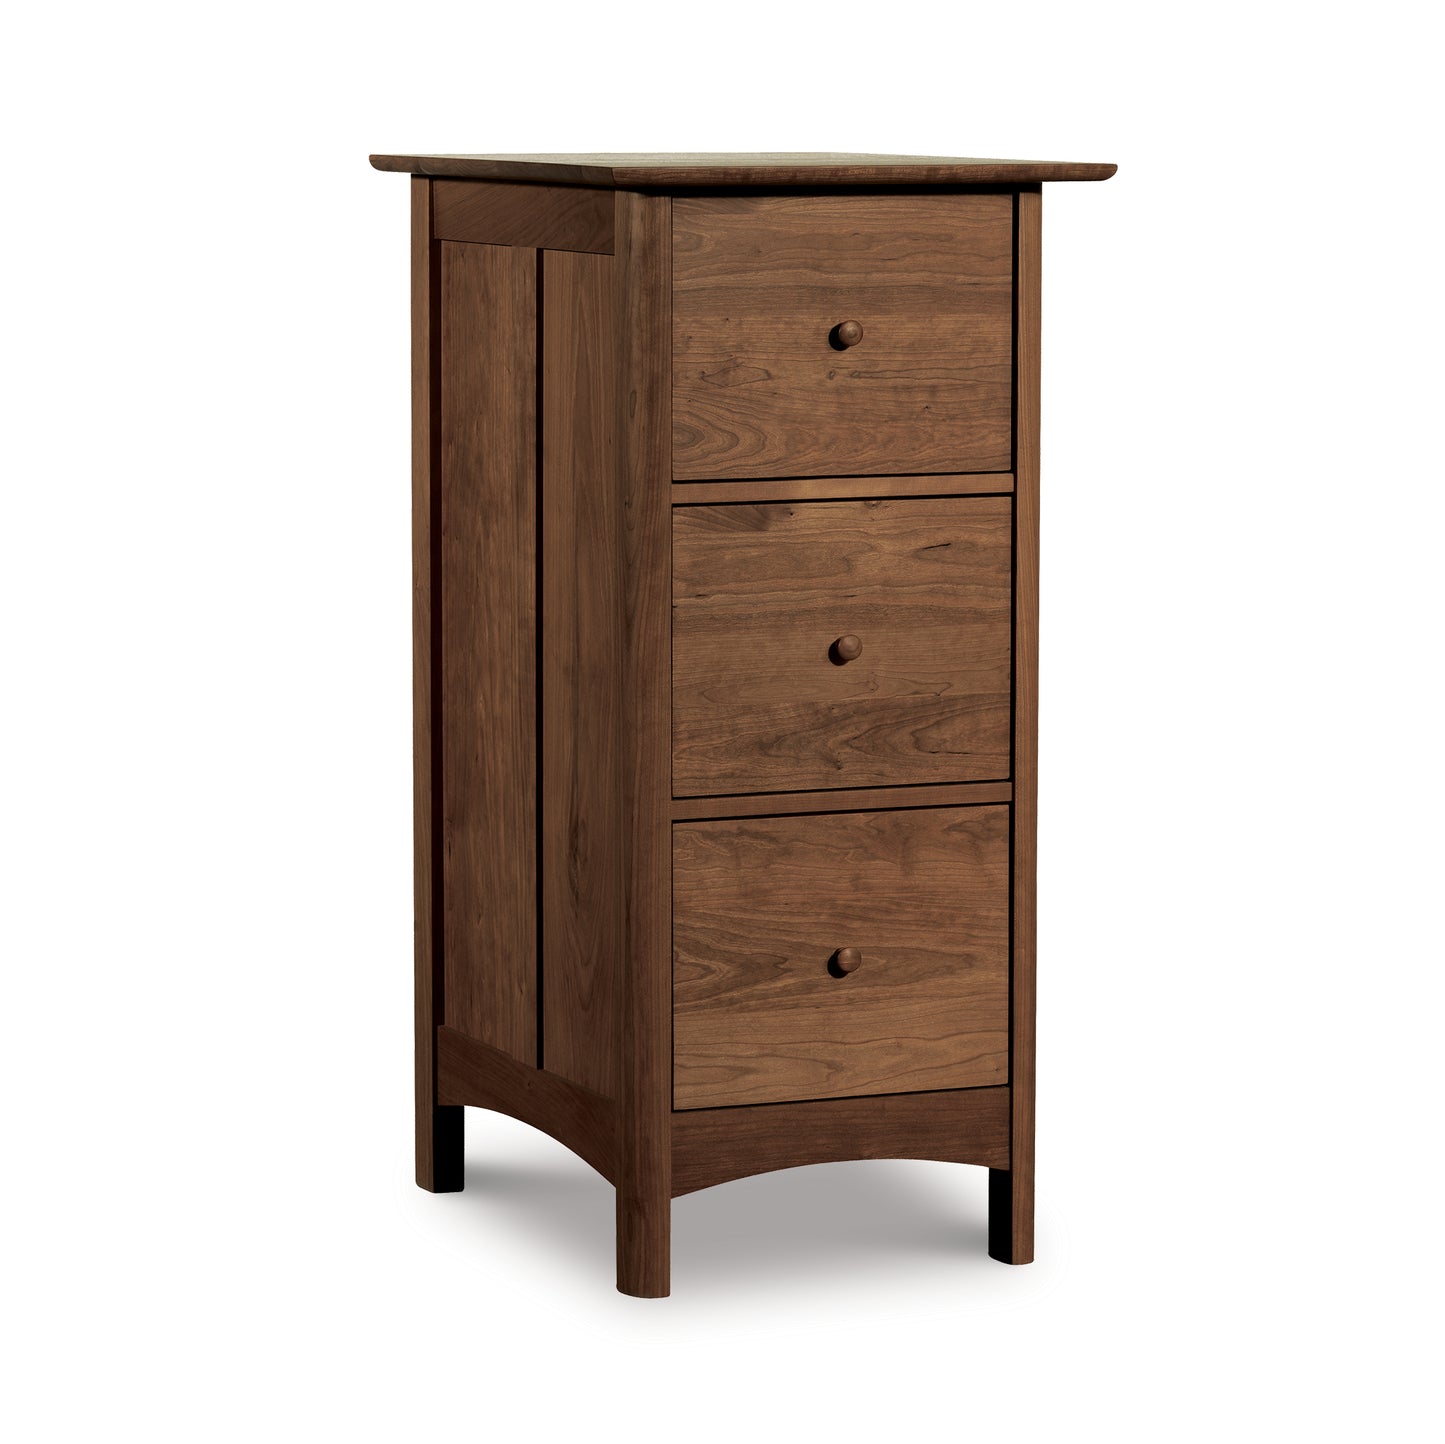 A Heartwood Shaker 3-Drawer Vertical File Cabinet from Vermont Furniture Designs on a white background.